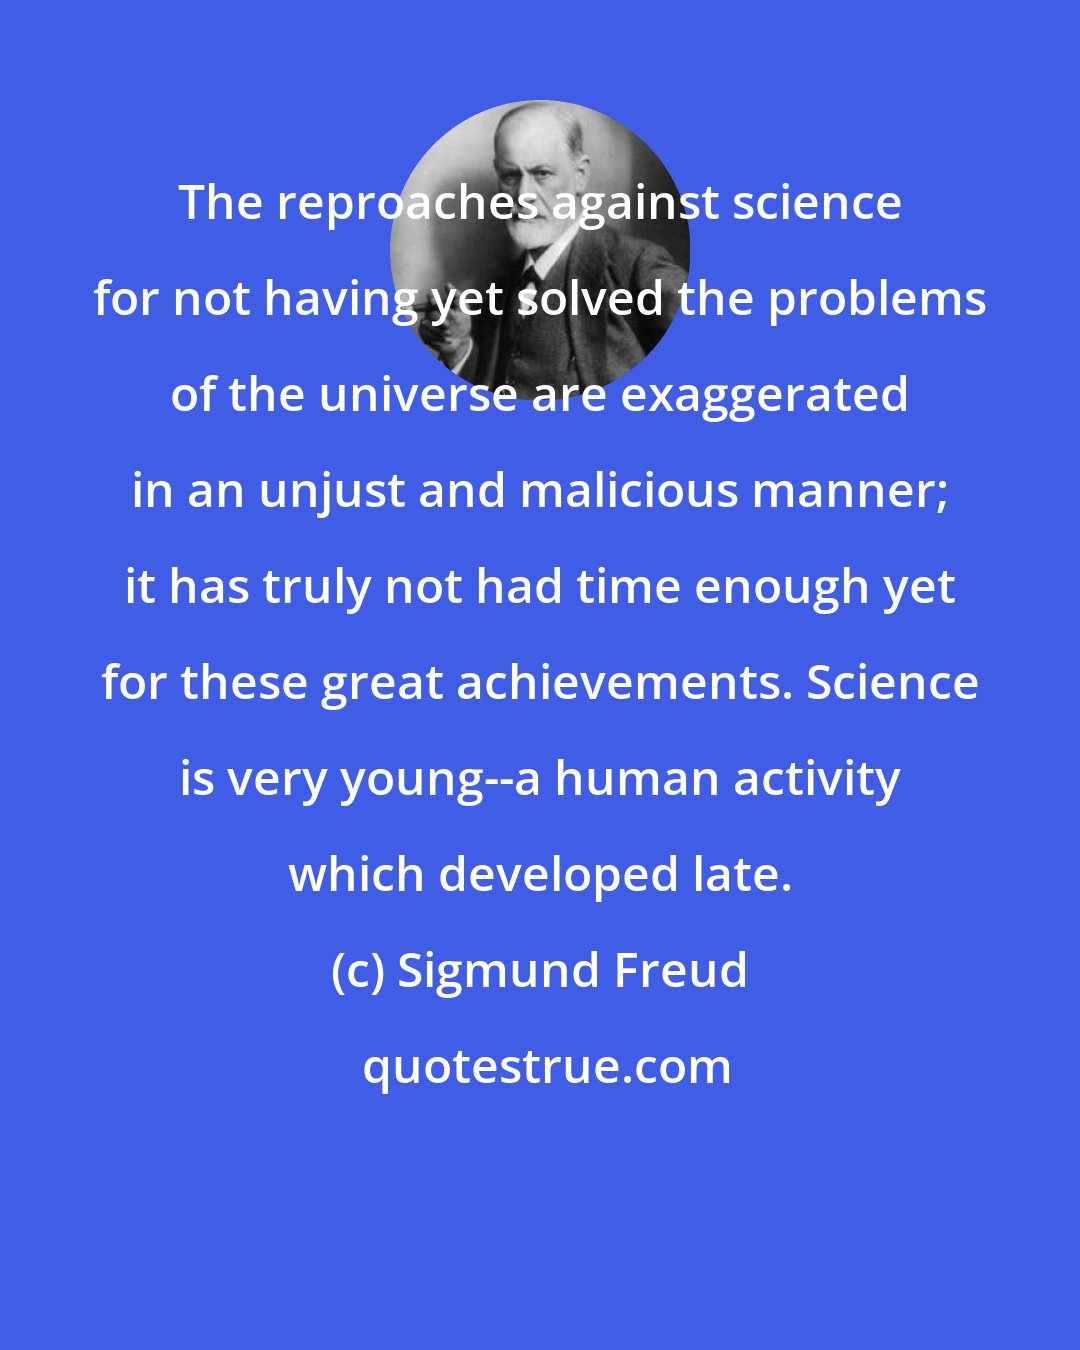 Sigmund Freud: The reproaches against science for not having yet solved the problems of the universe are exaggerated in an unjust and malicious manner; it has truly not had time enough yet for these great achievements. Science is very young--a human activity which developed late.